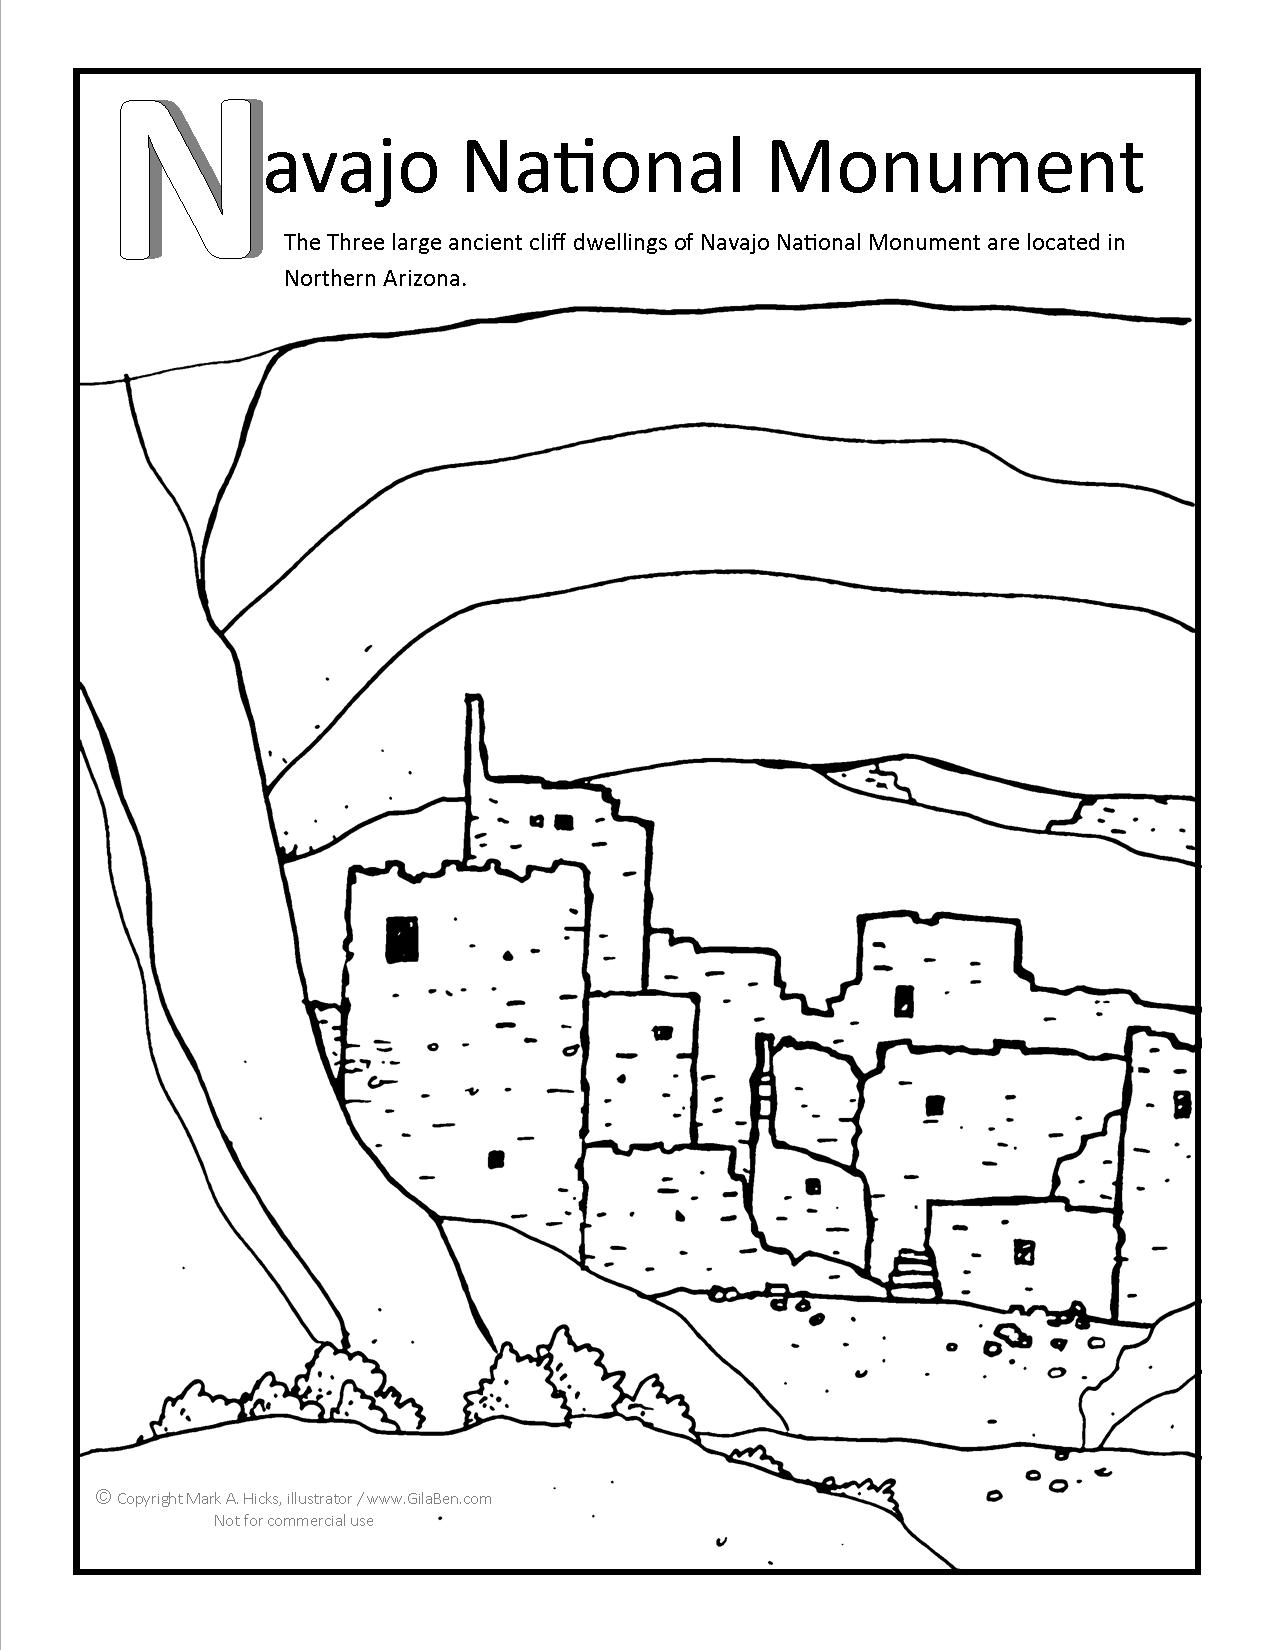 Navajo National Monument Coloring page